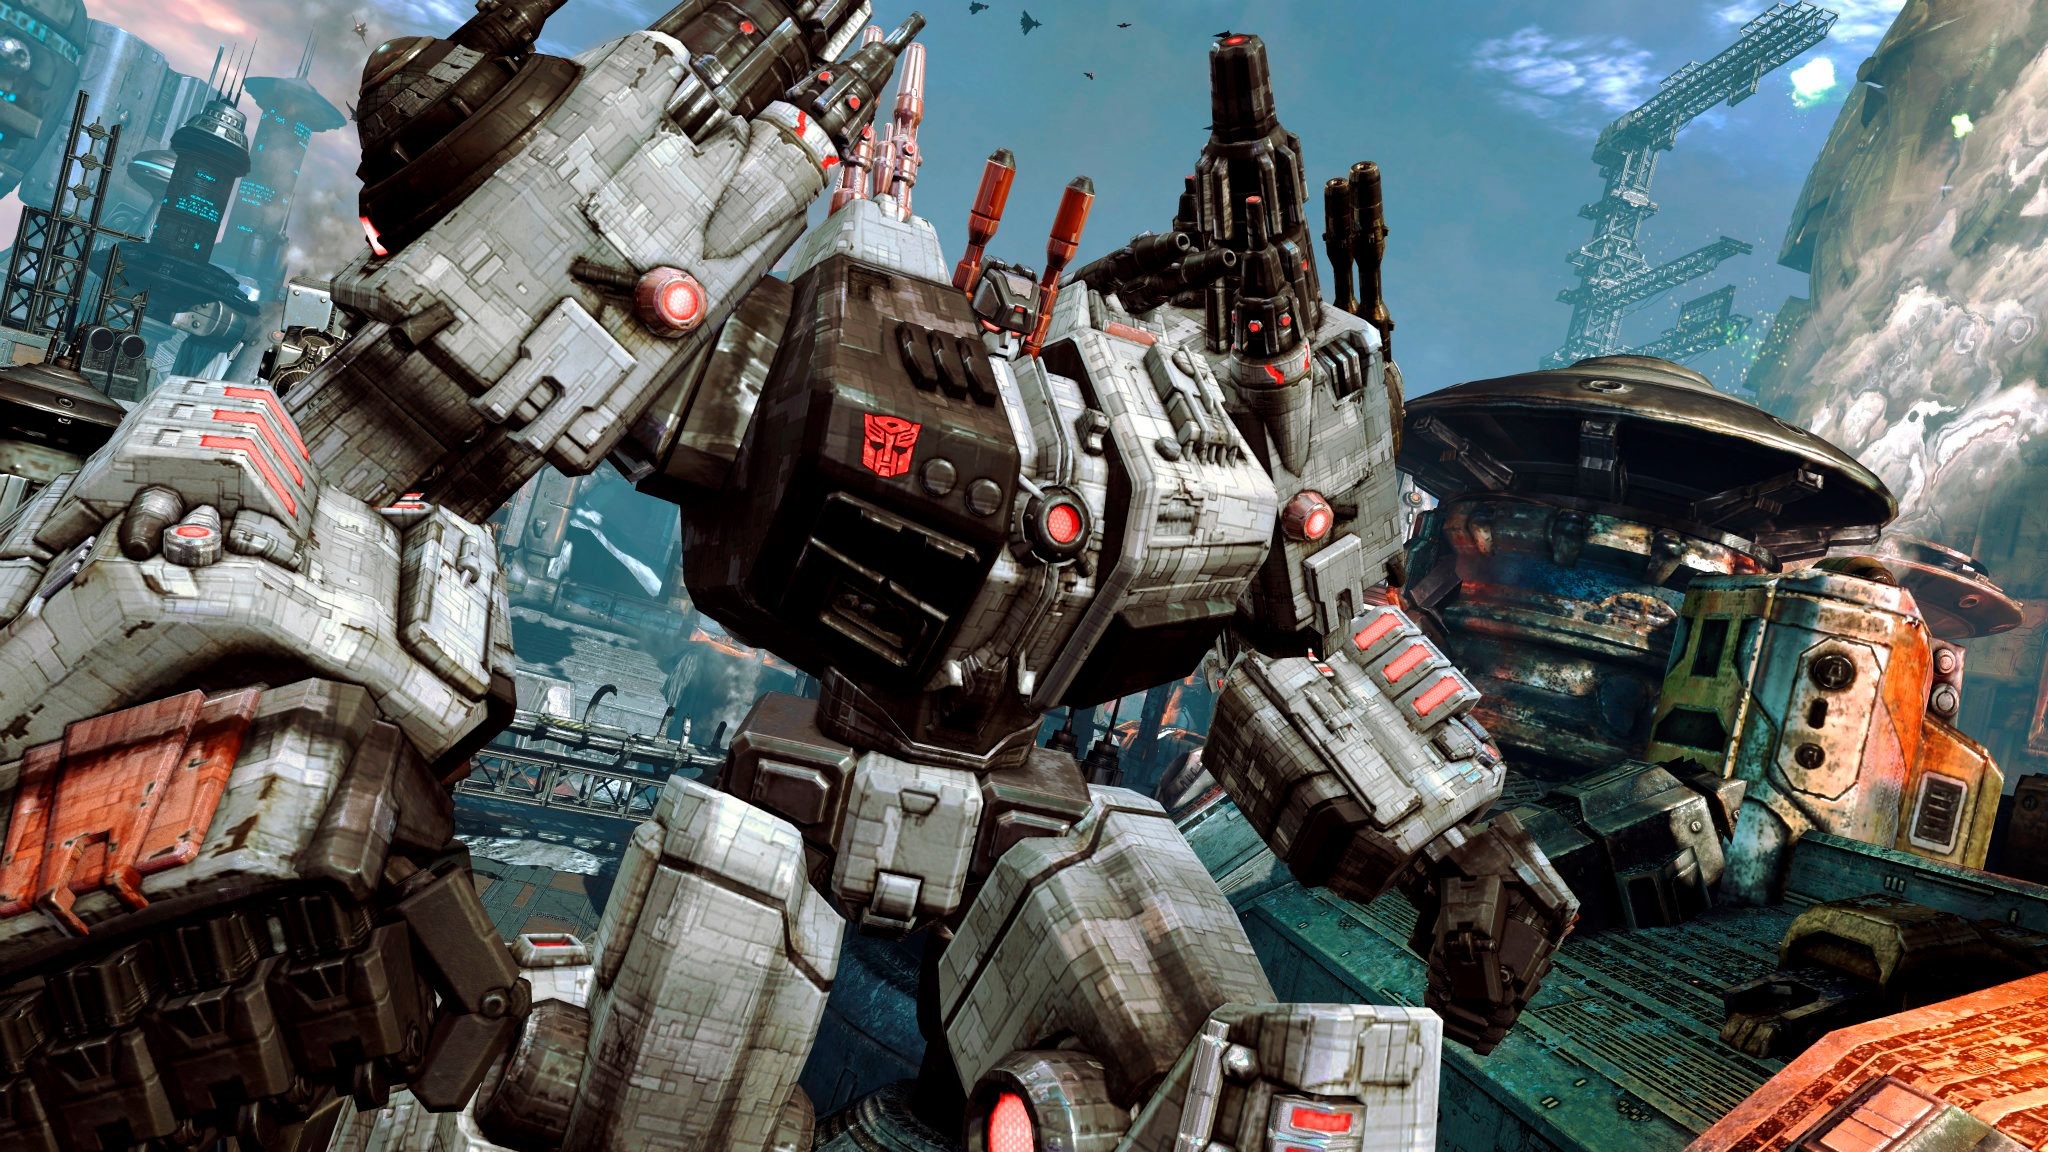 2048x1152 Metroplex shows up for a little bit to let you launch some airstrikes.